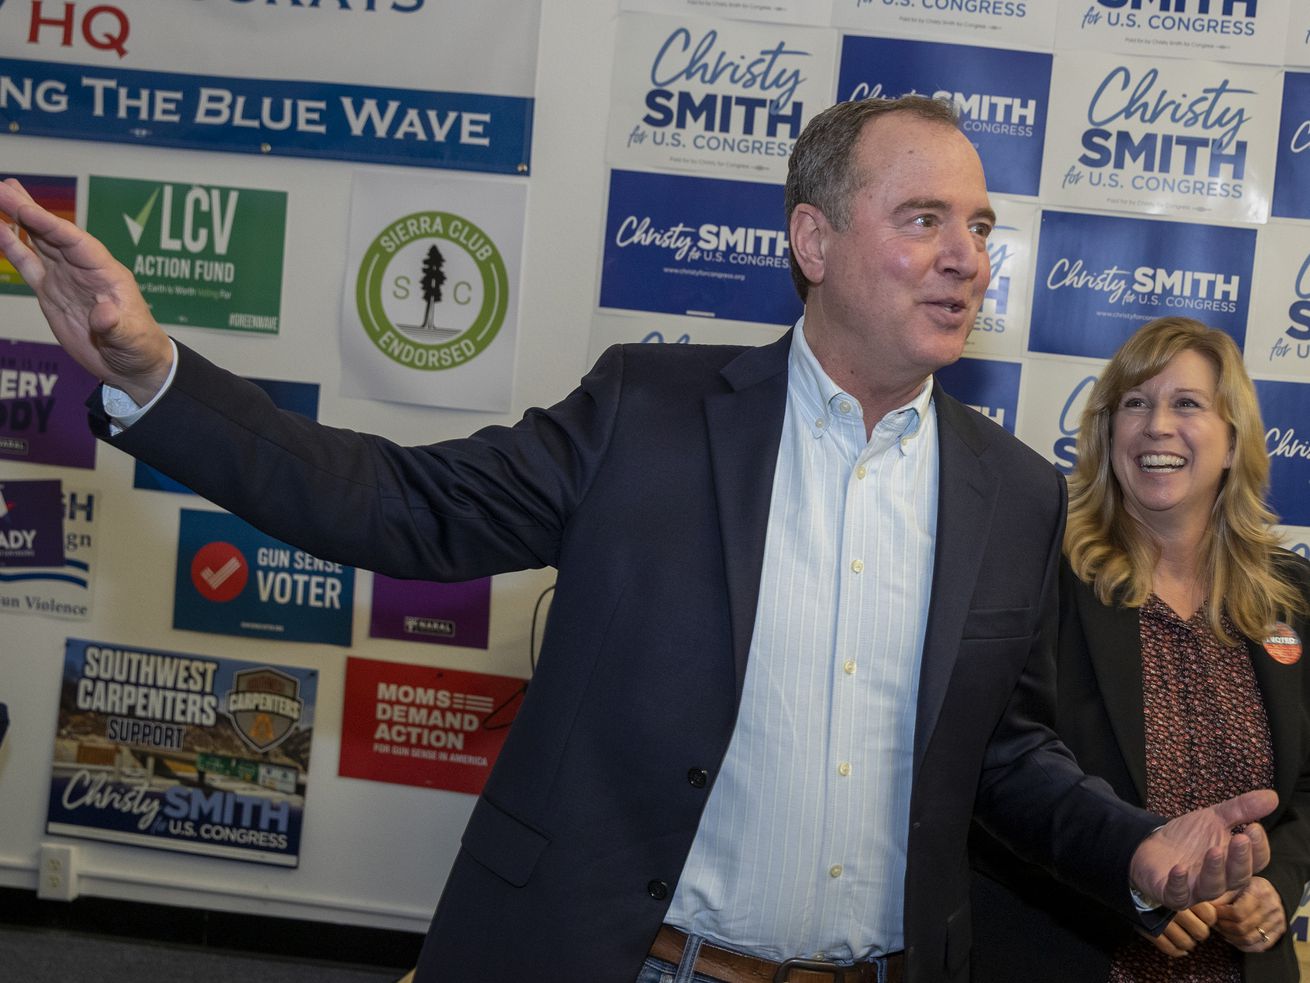 Congressman Adam Schiff and Christy Smith stand in front of a backdrop covered with logos.